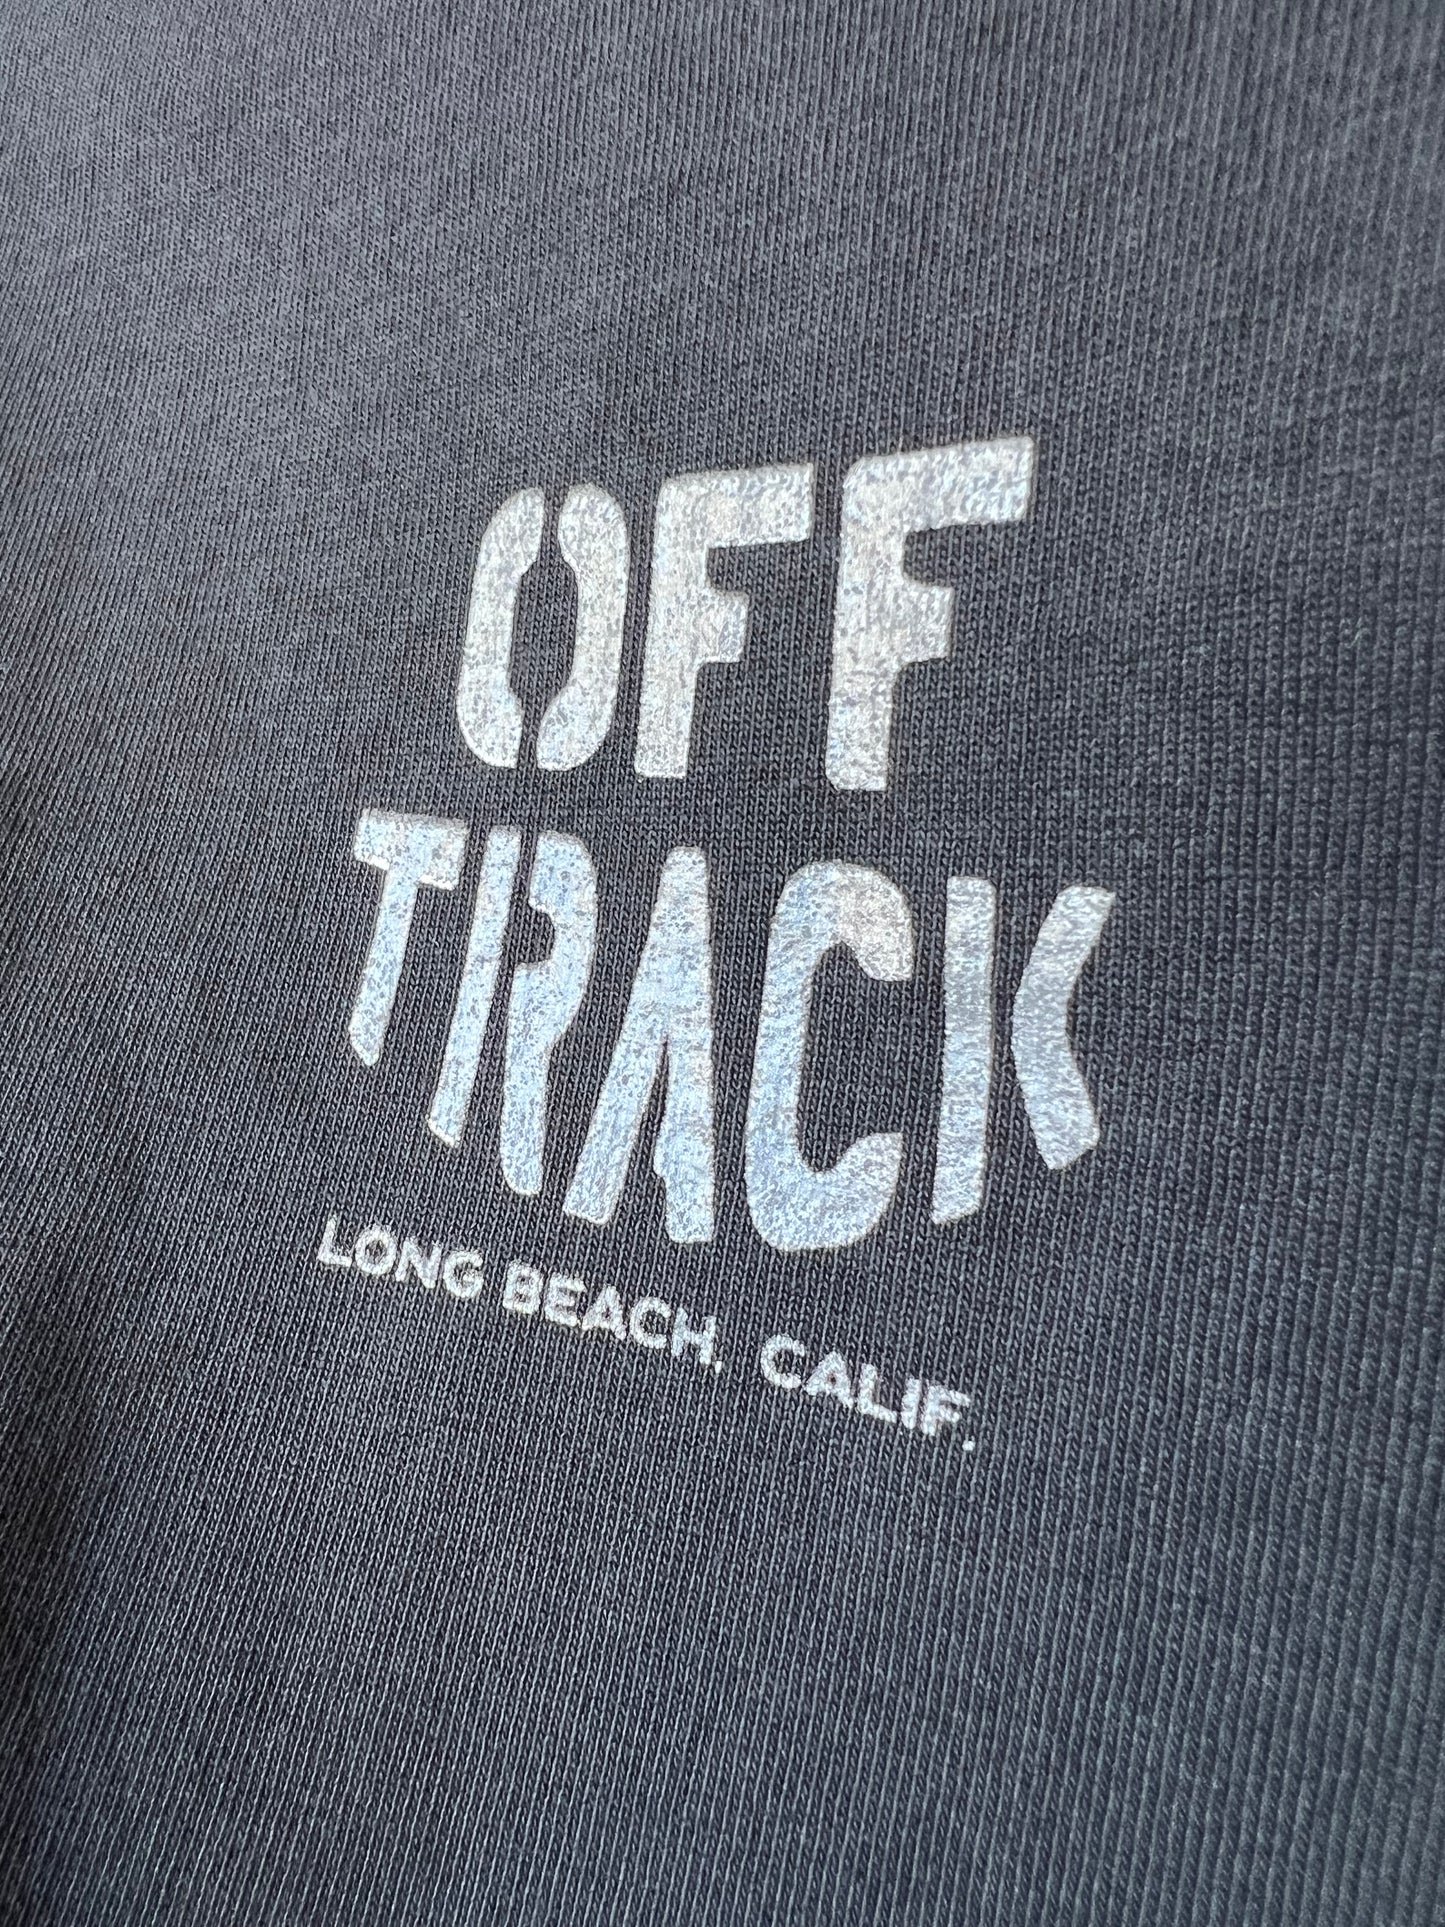 OFF TRACK DOUBLE HIT REFLECTIVE STENCIL FADED BLACK SHORT SLEEVE